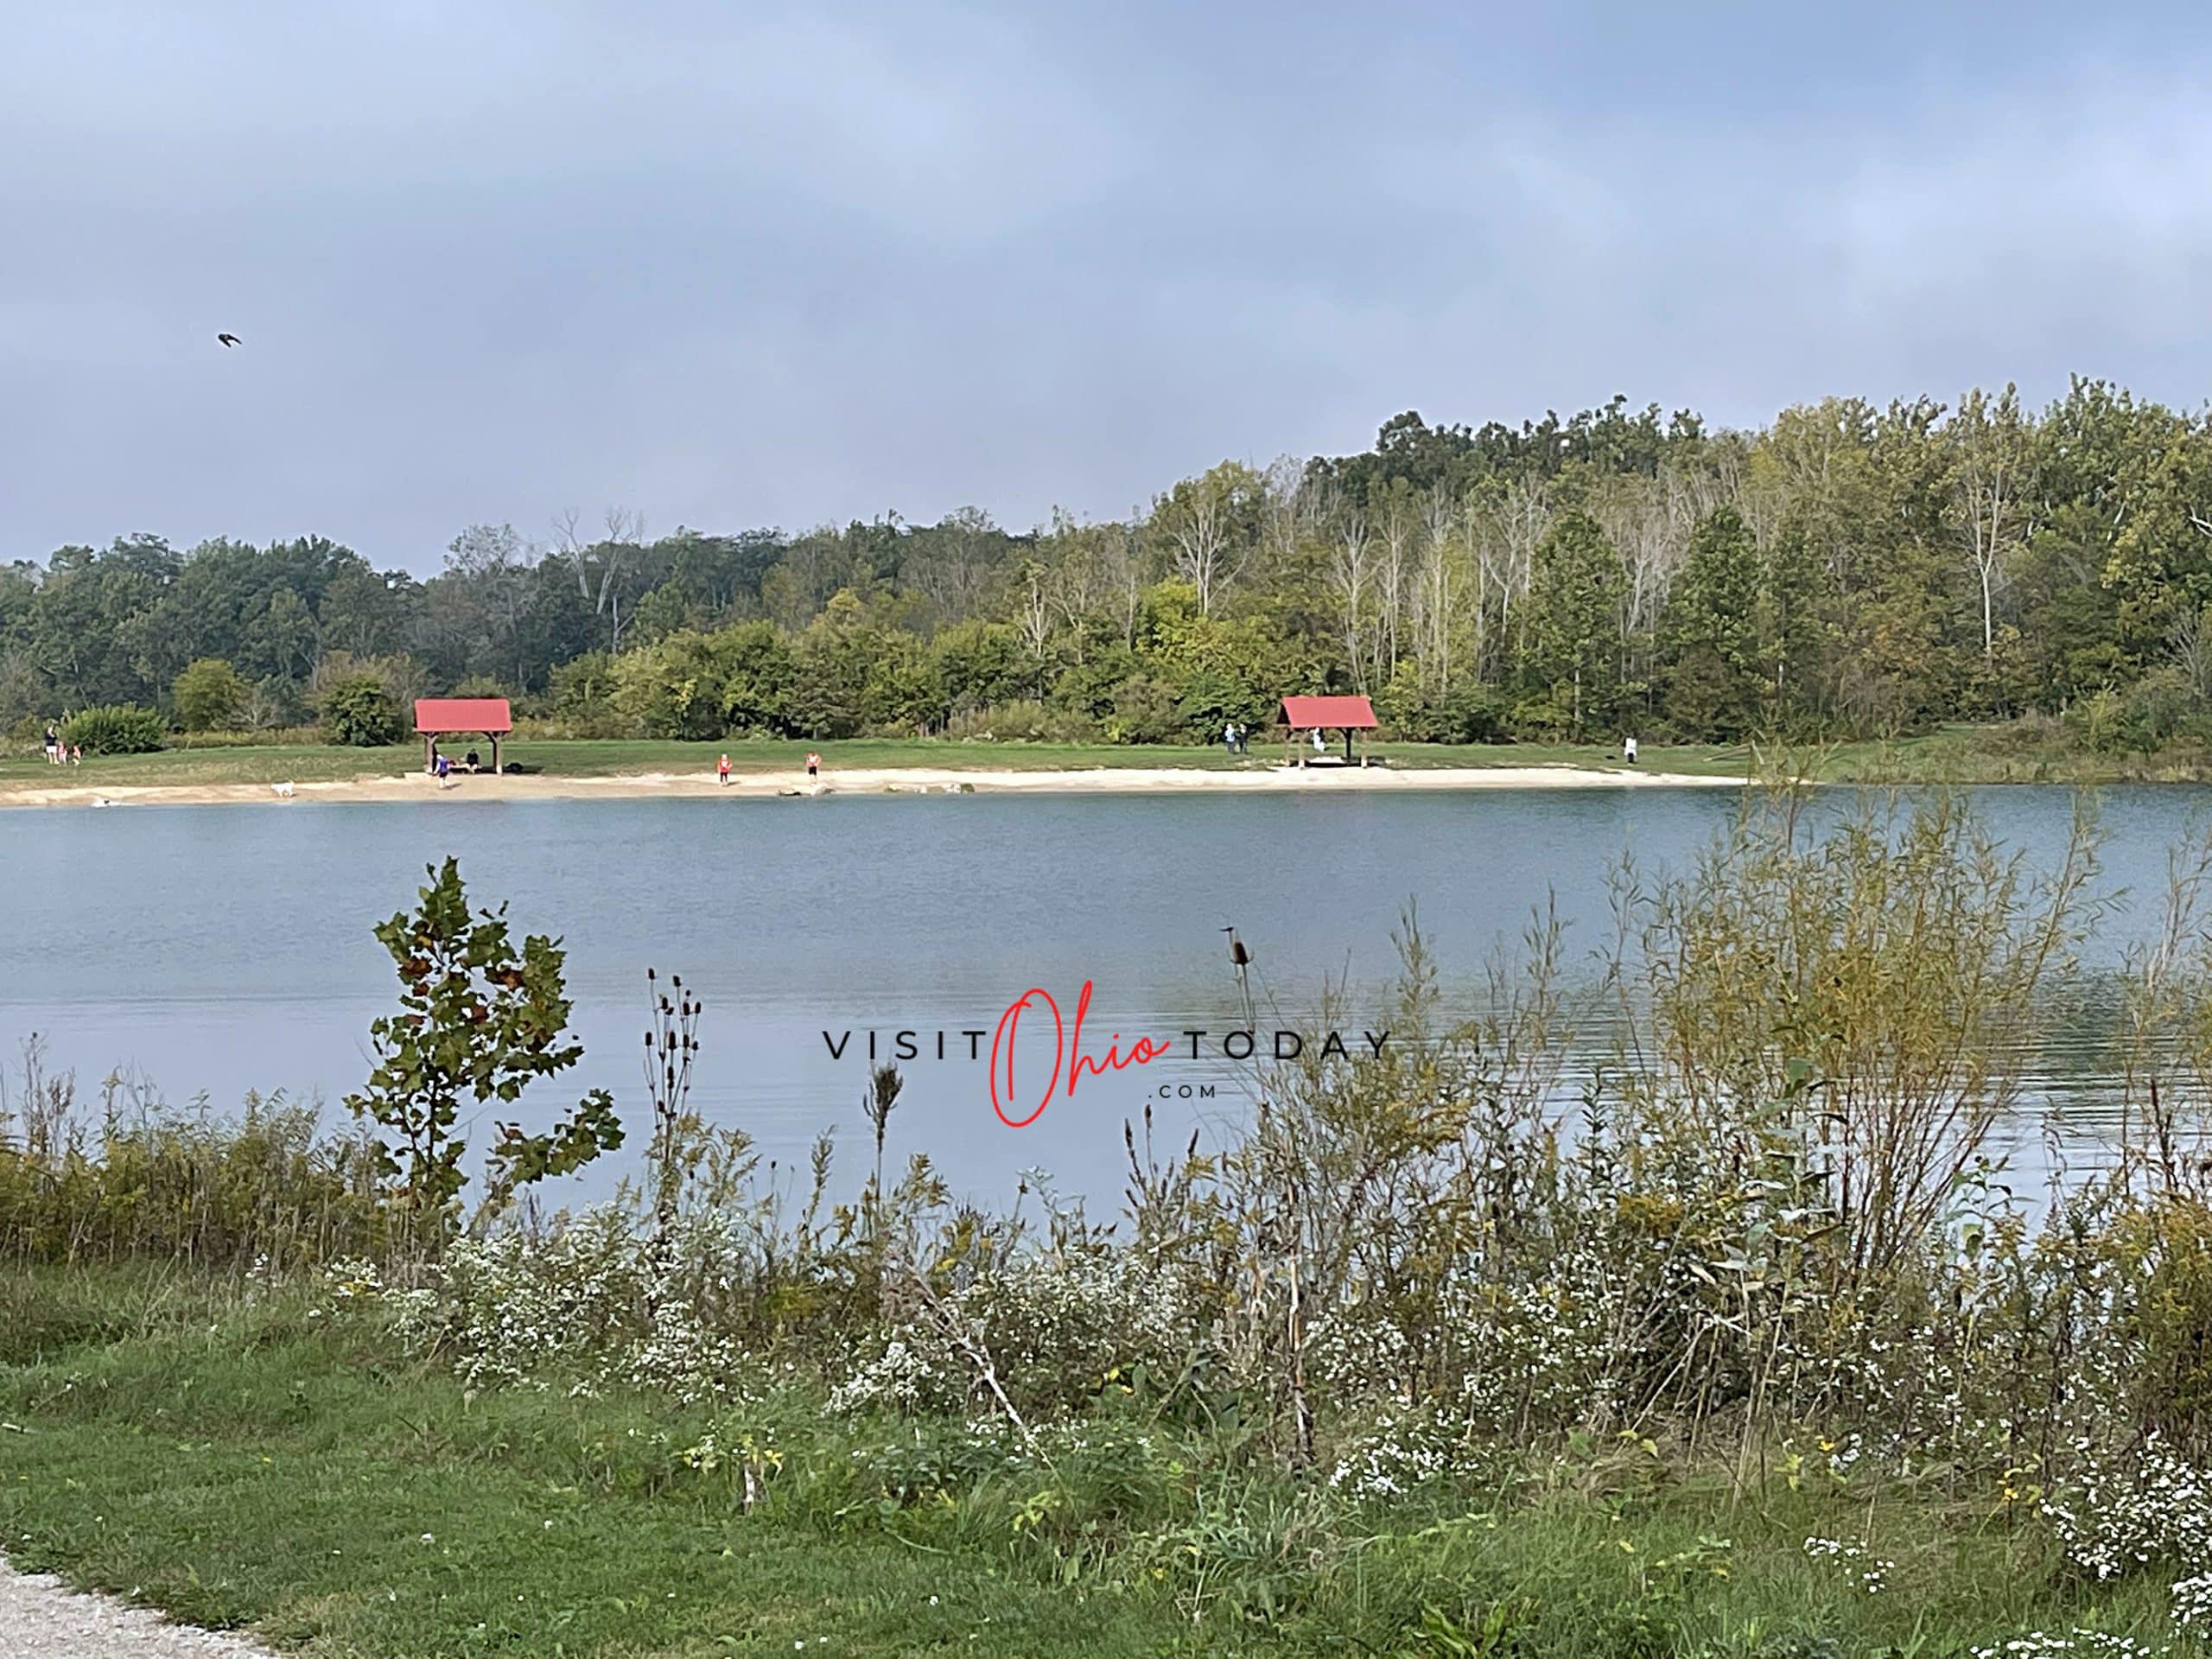 horizontal image of a lake at prairie oaks metro park with shelters in the background and foliage in the foreground Photo credit: Cindy Gordon of VisitOhioToday.com